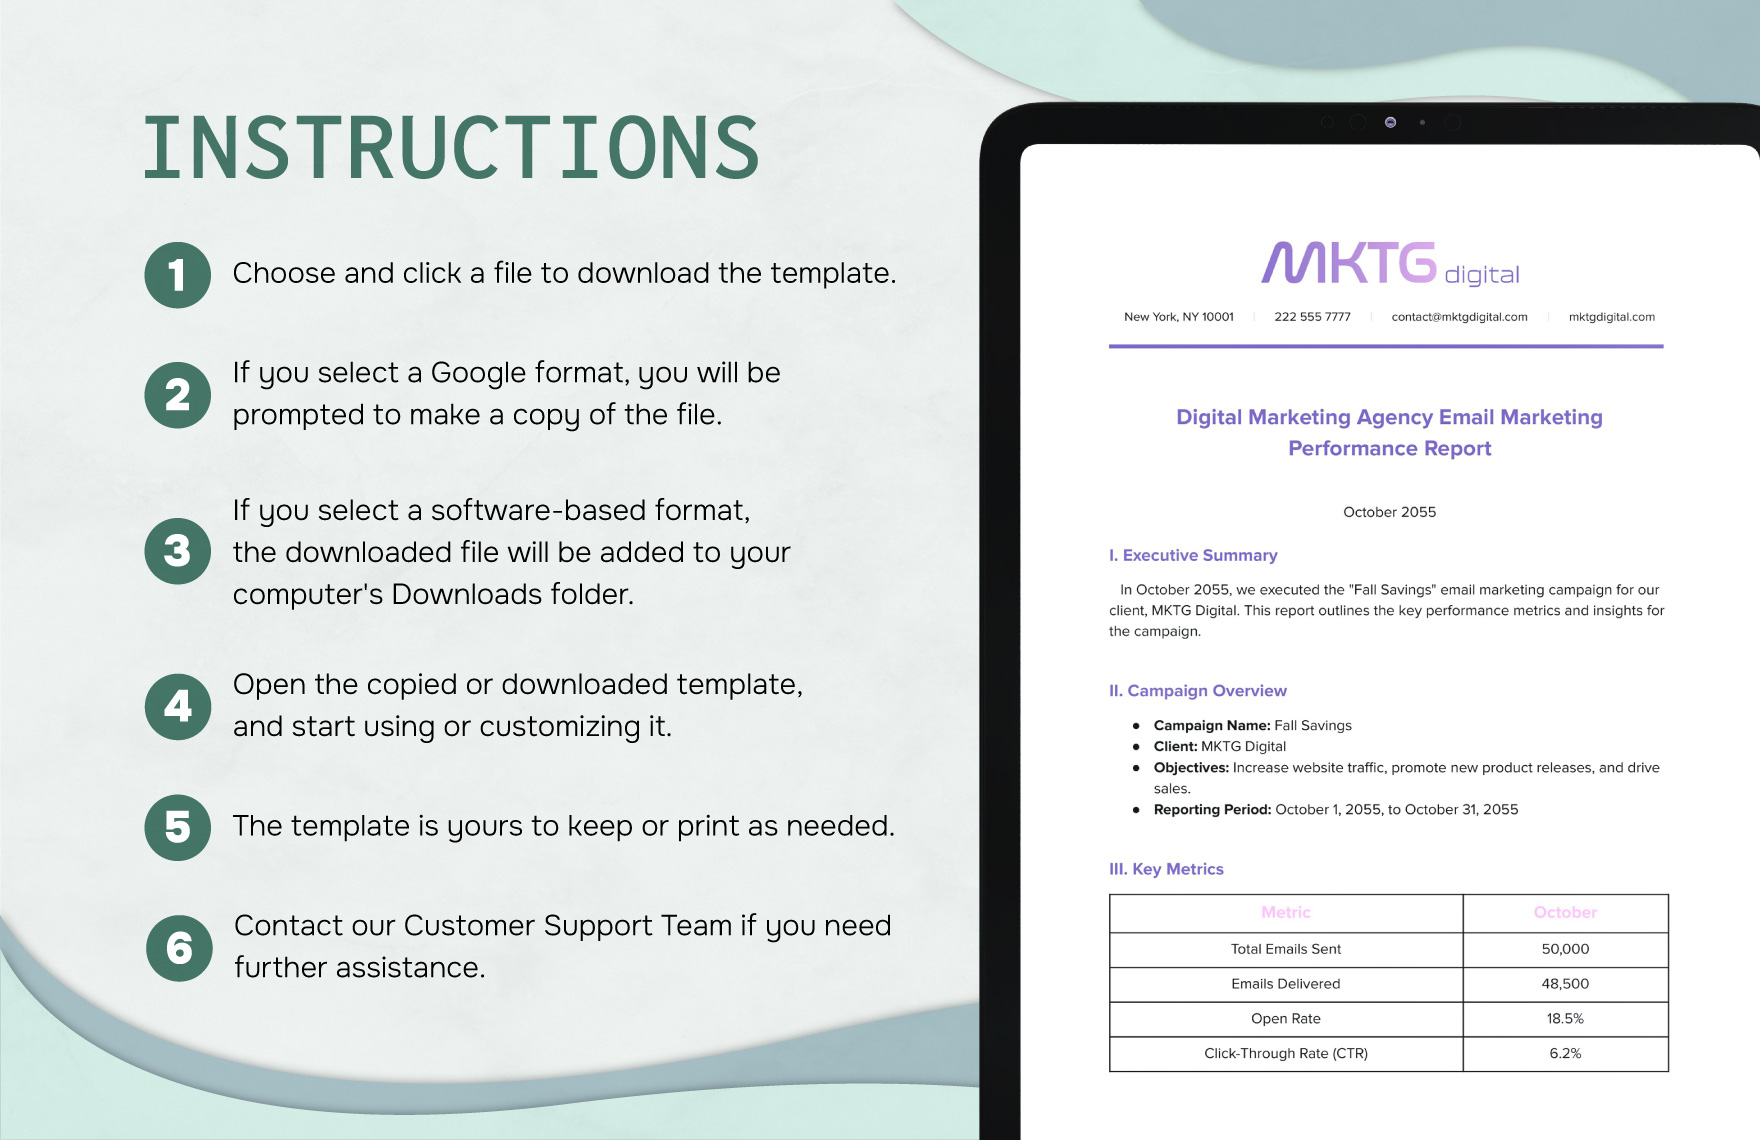 Digital Marketing Agency Email Marketing Performance Report Template